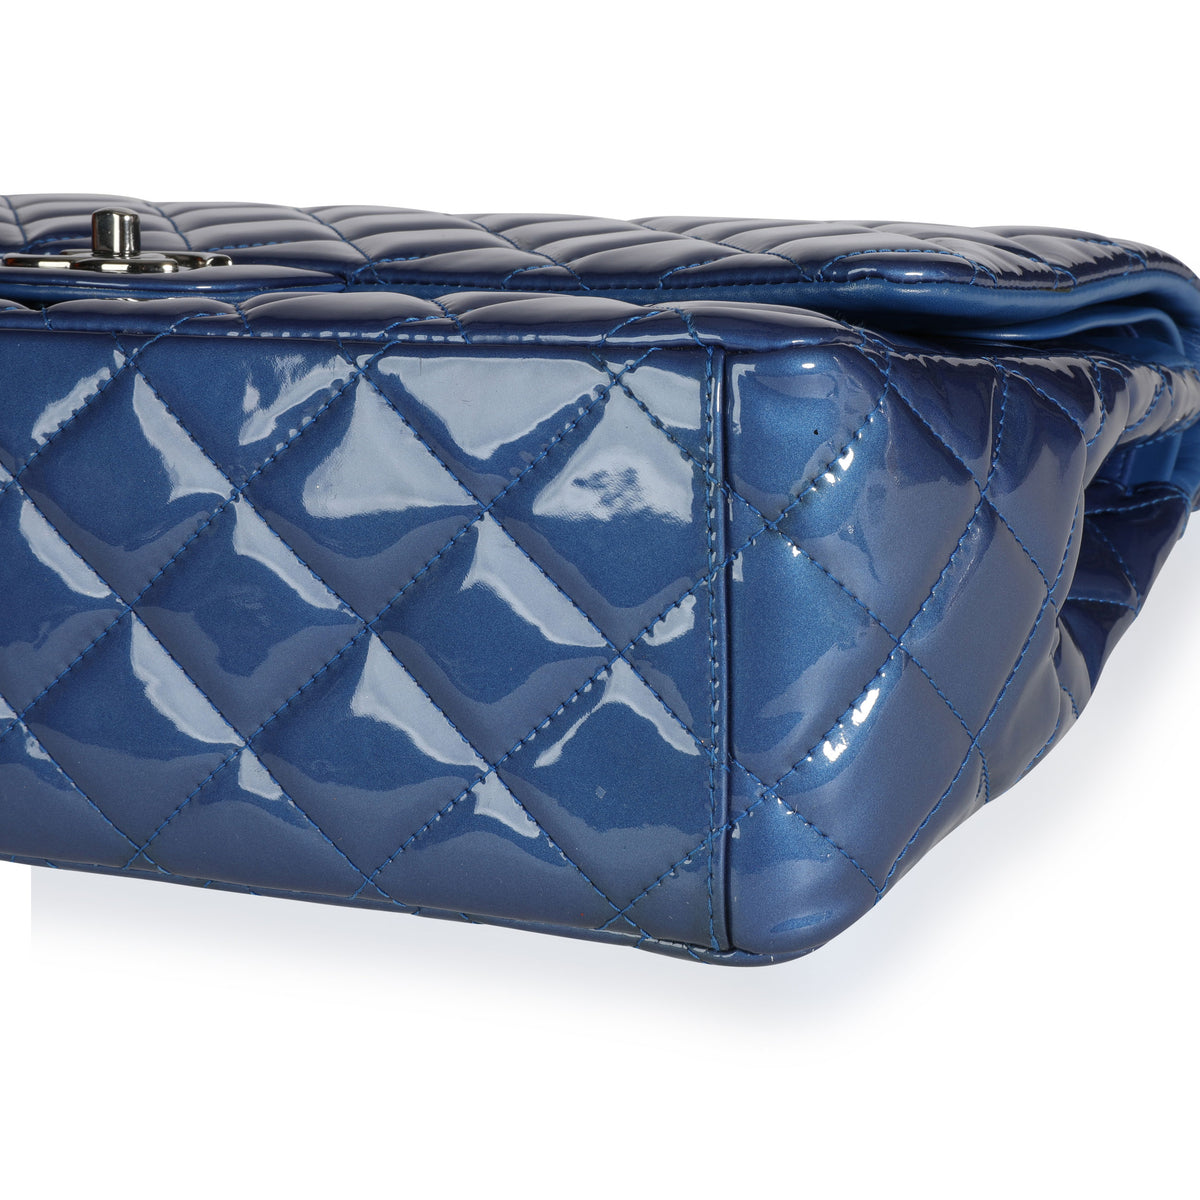 Chanel Blue Patent Leather Quilted Maxi Classic Double Flap Bag by